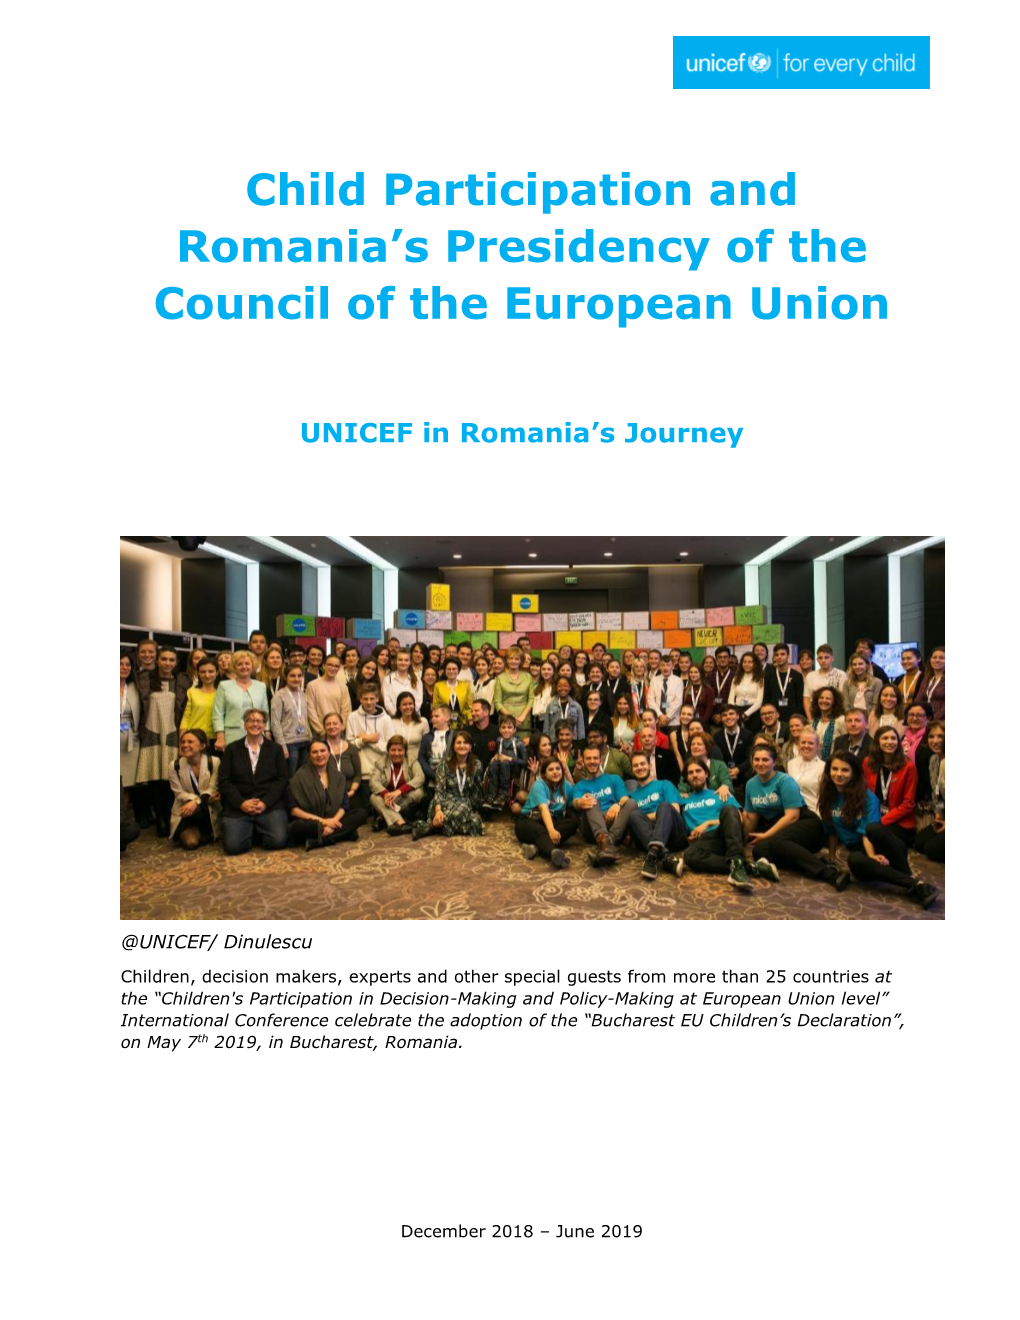 Child Participation and Romania's Presidency of the Council of The